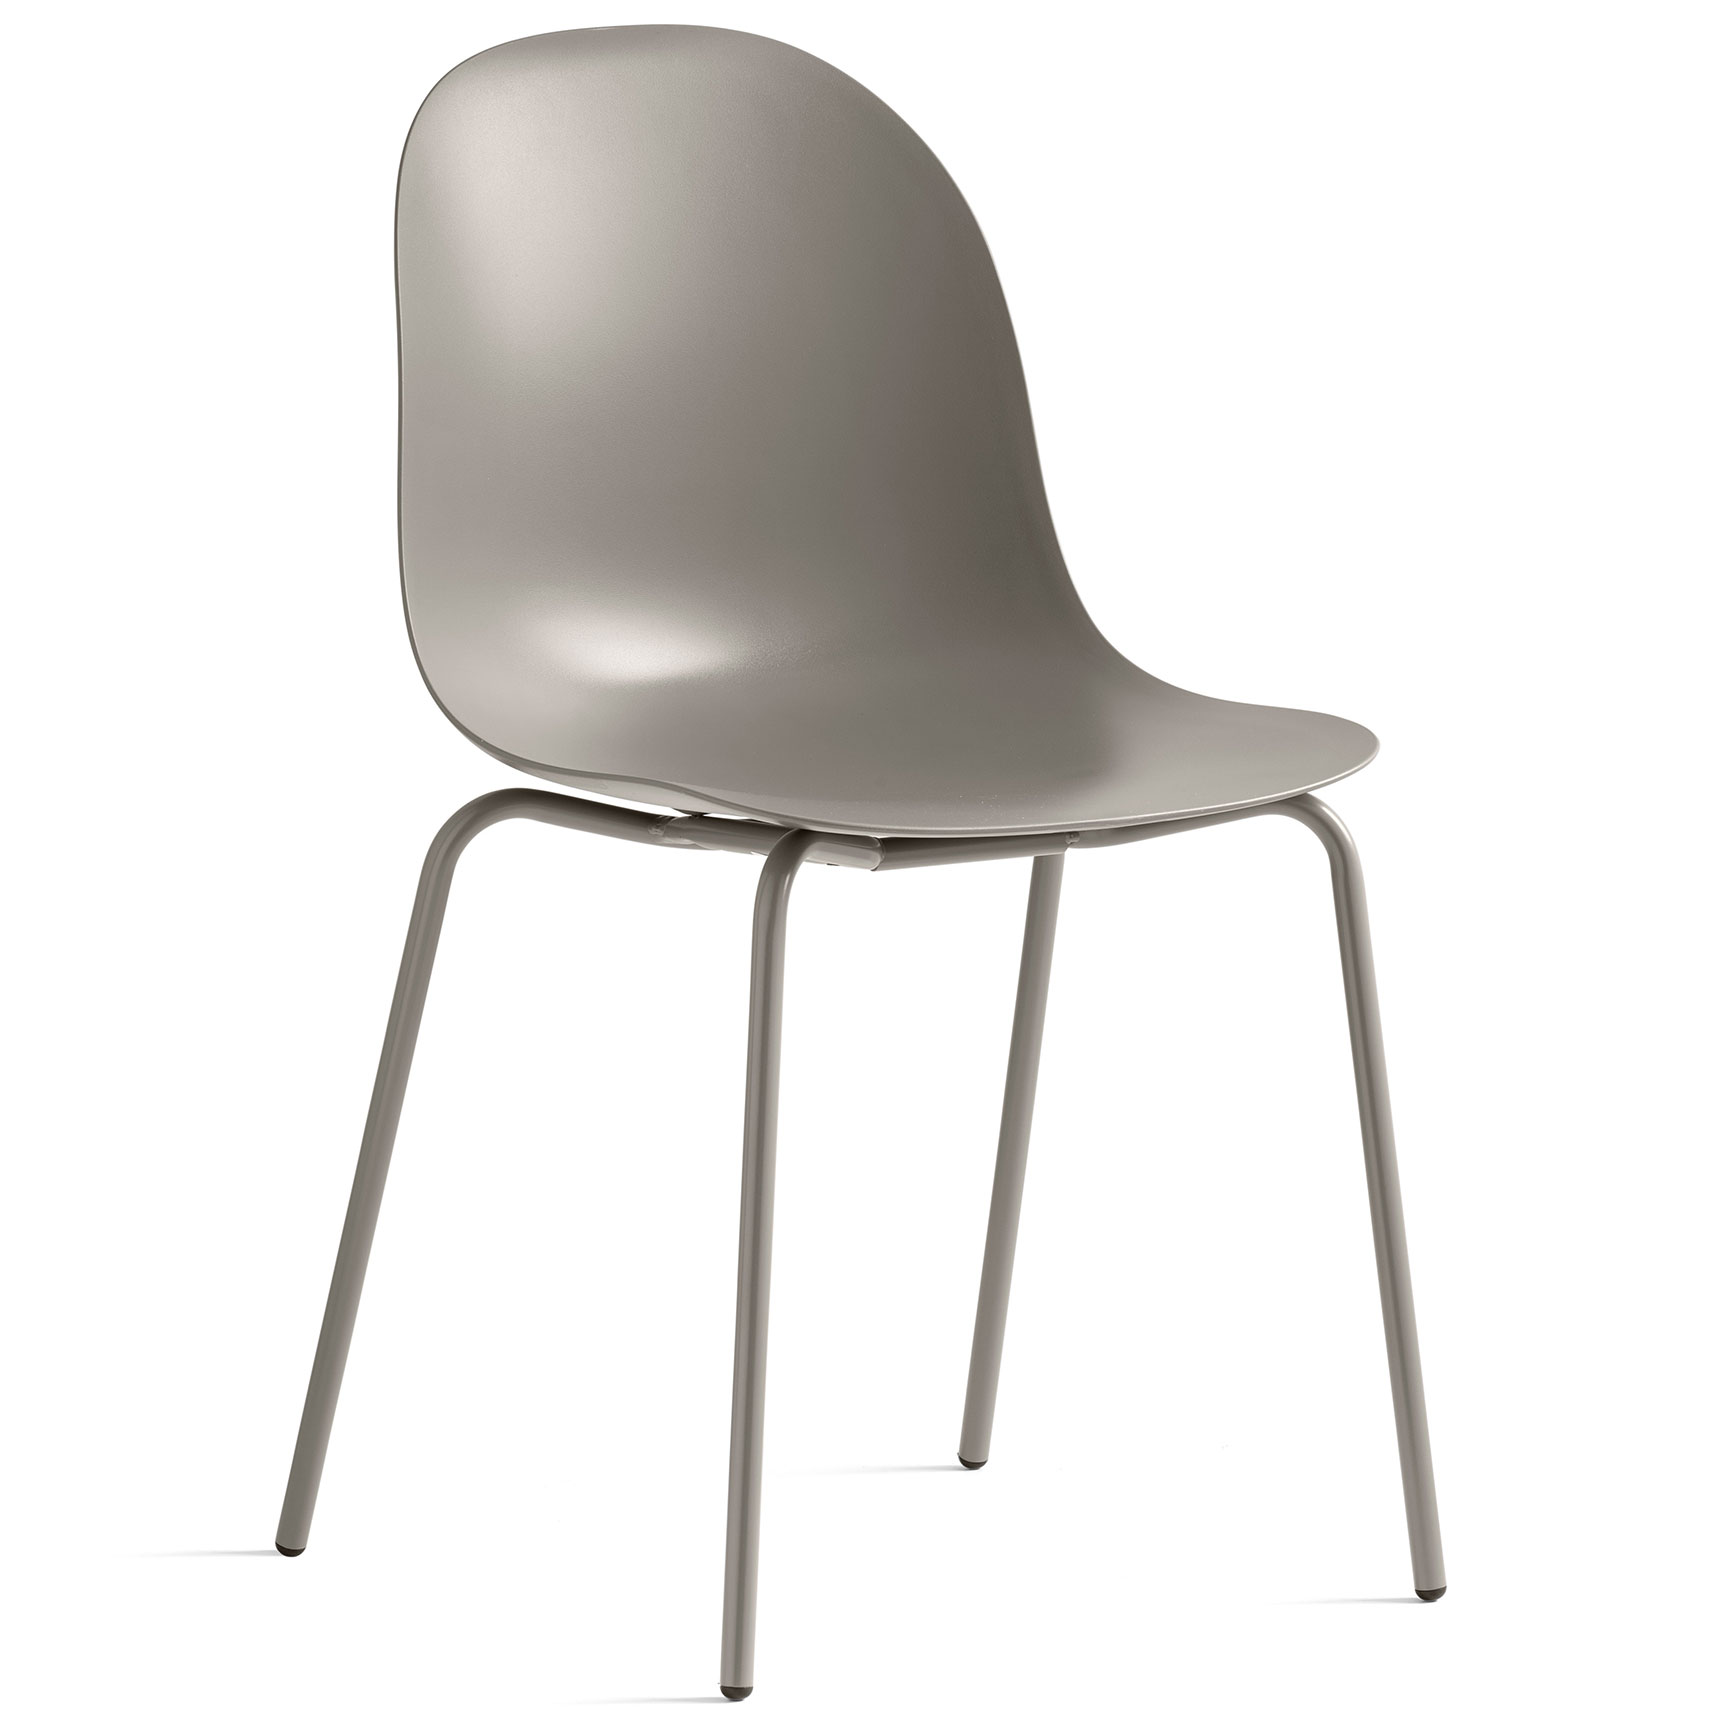 Academy Chair by Connubia | CB166300017690000000000 | CON1185139